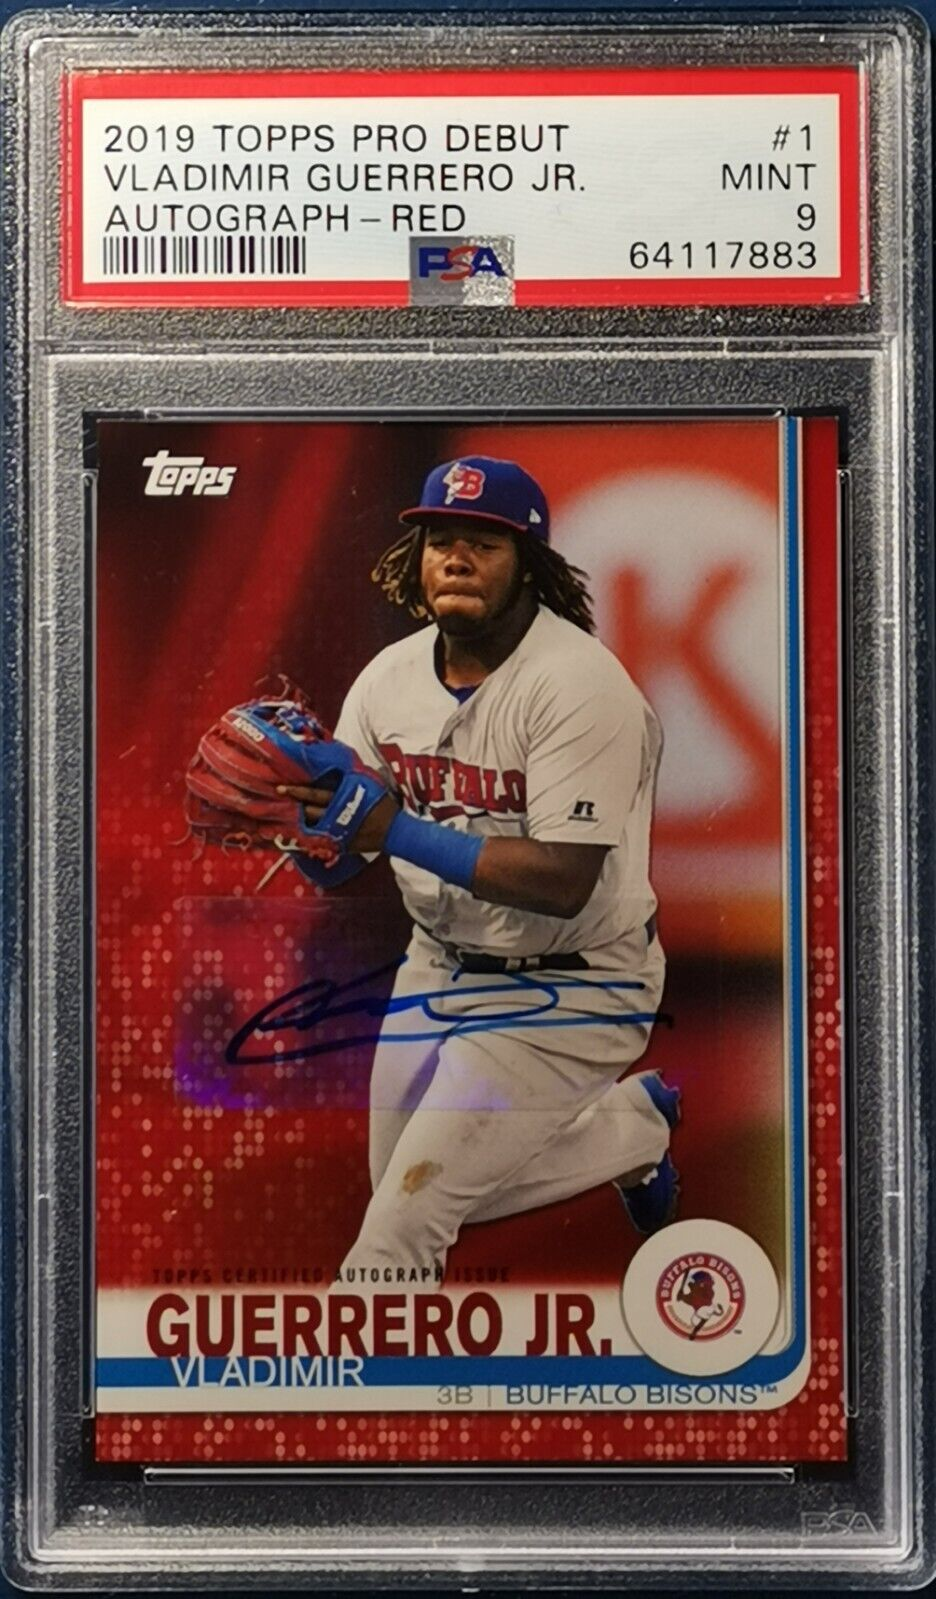 Most valuable Vladimir Guerrero Jr rookie cards: 2019 Topps Pro Debut Autograph Red